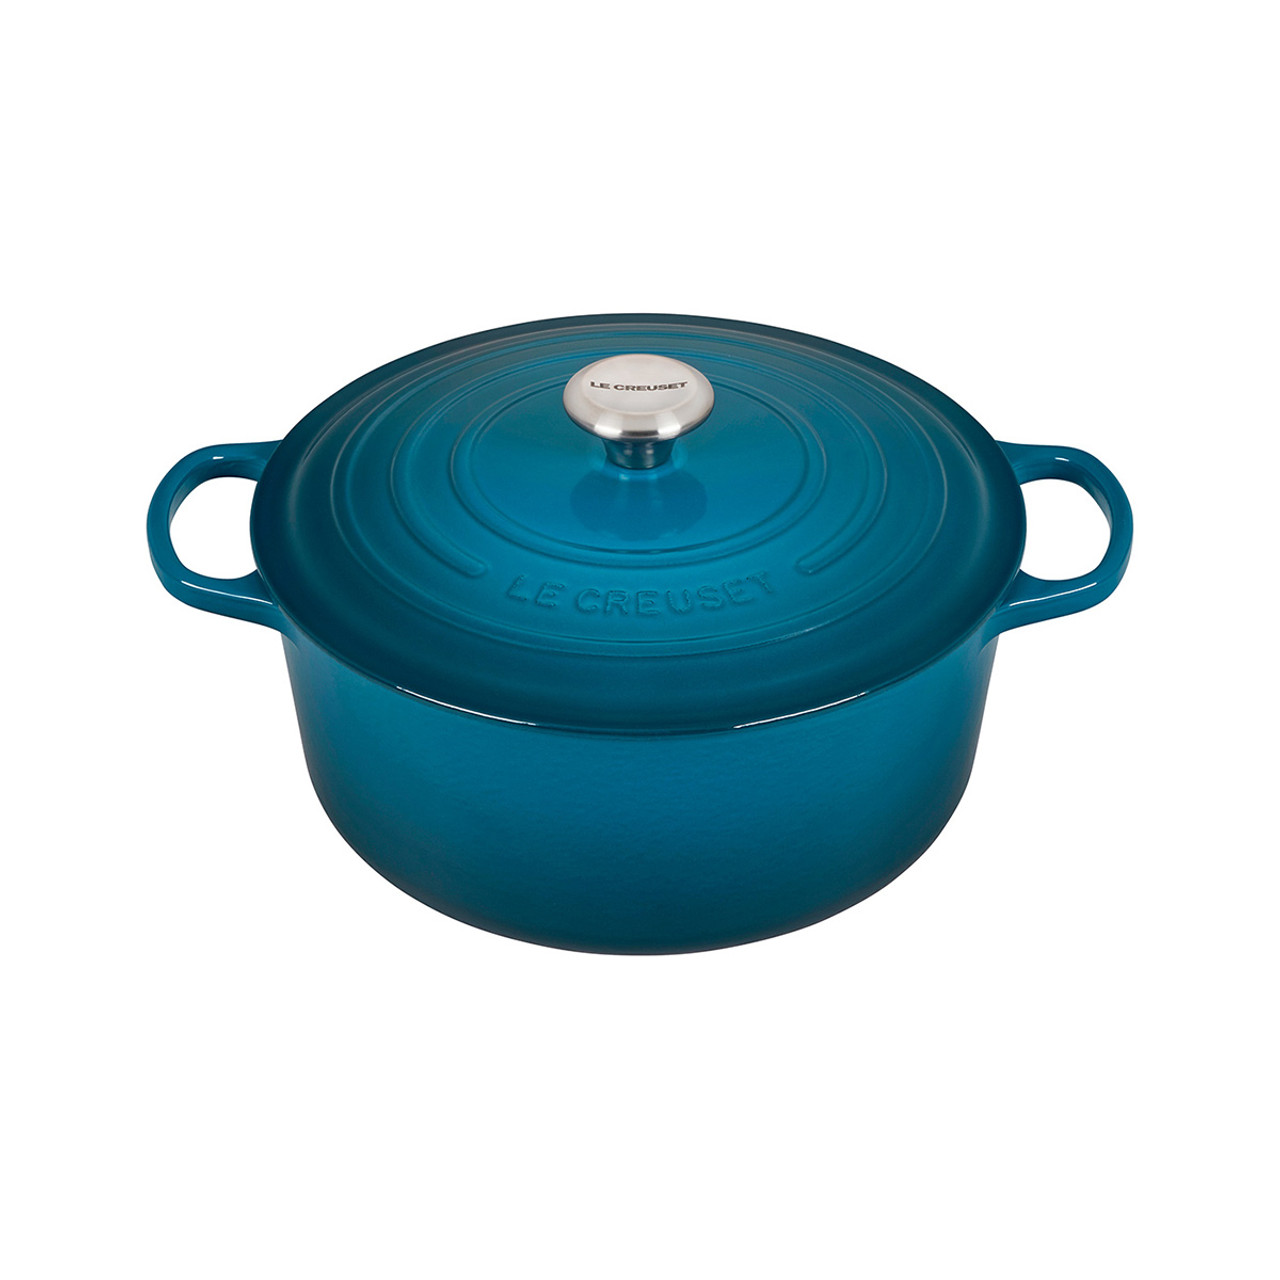 Le Creuset – the international pantry